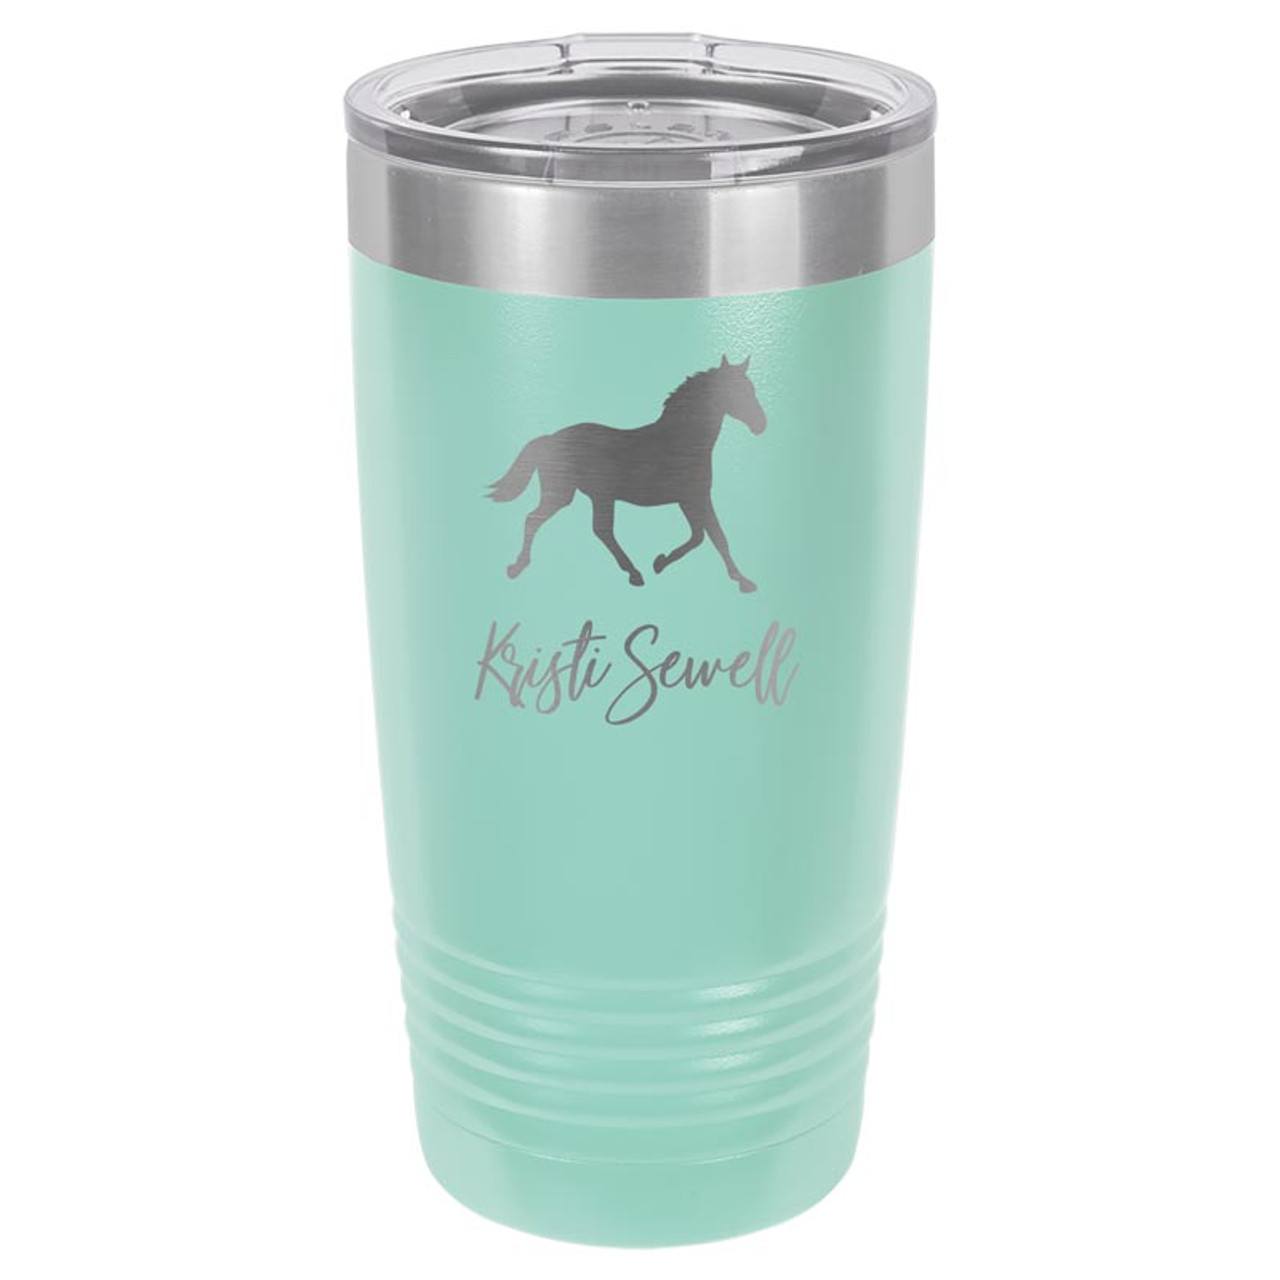 https://cdn11.bigcommerce.com/s-d22a0/images/stencil/1280x1280/products/2343/10523/horse-lover-tumbler-personalized__75046.1549760131.jpg?c=2